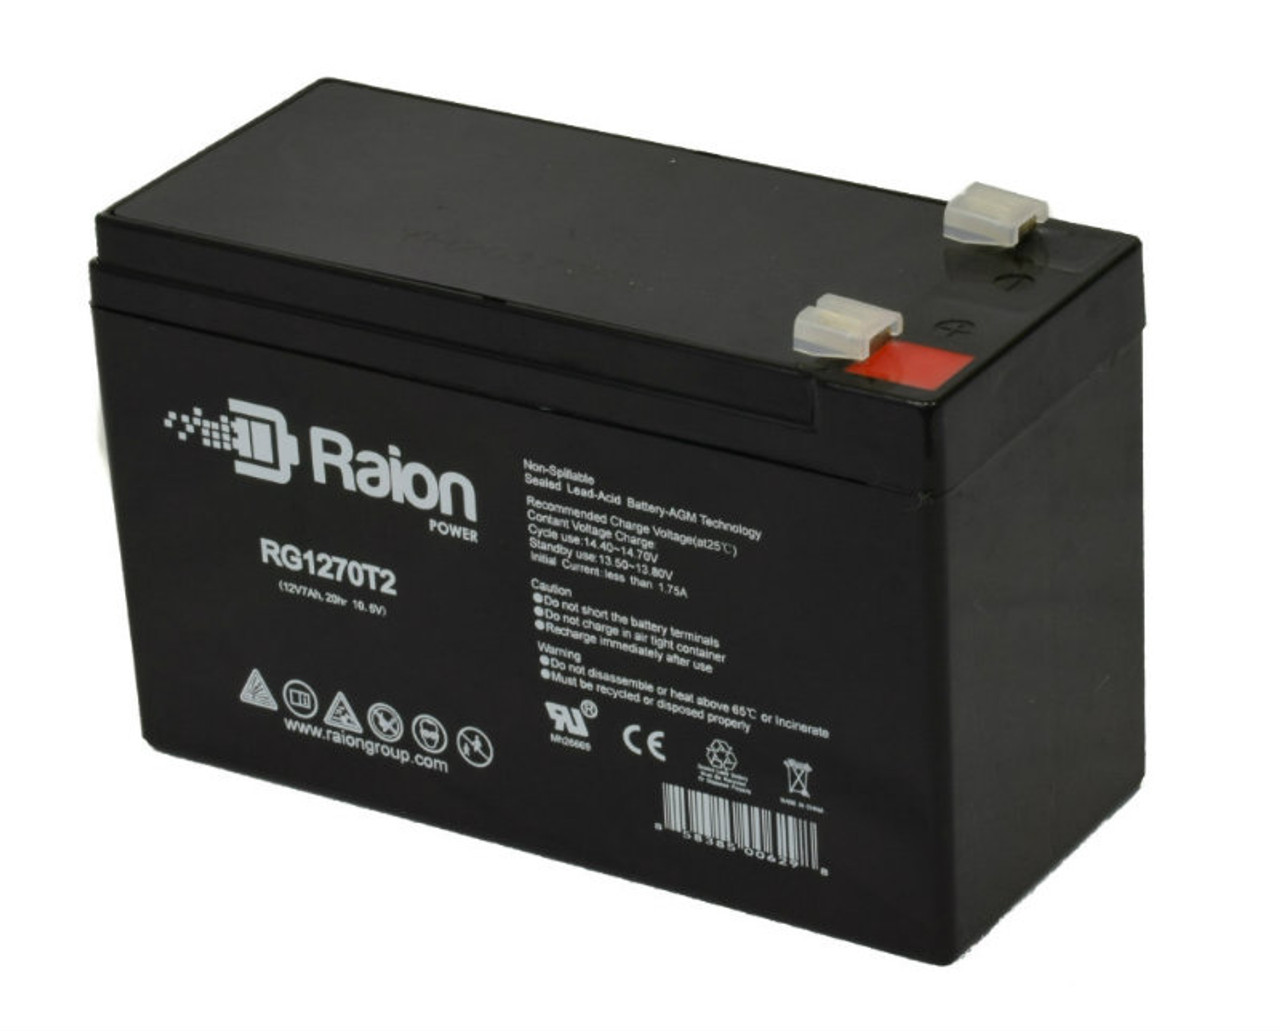 Raion Power Replacement 12V 7Ah Battery for Razor 13116312 E325 Electric Scooter Silver - 1 Pack